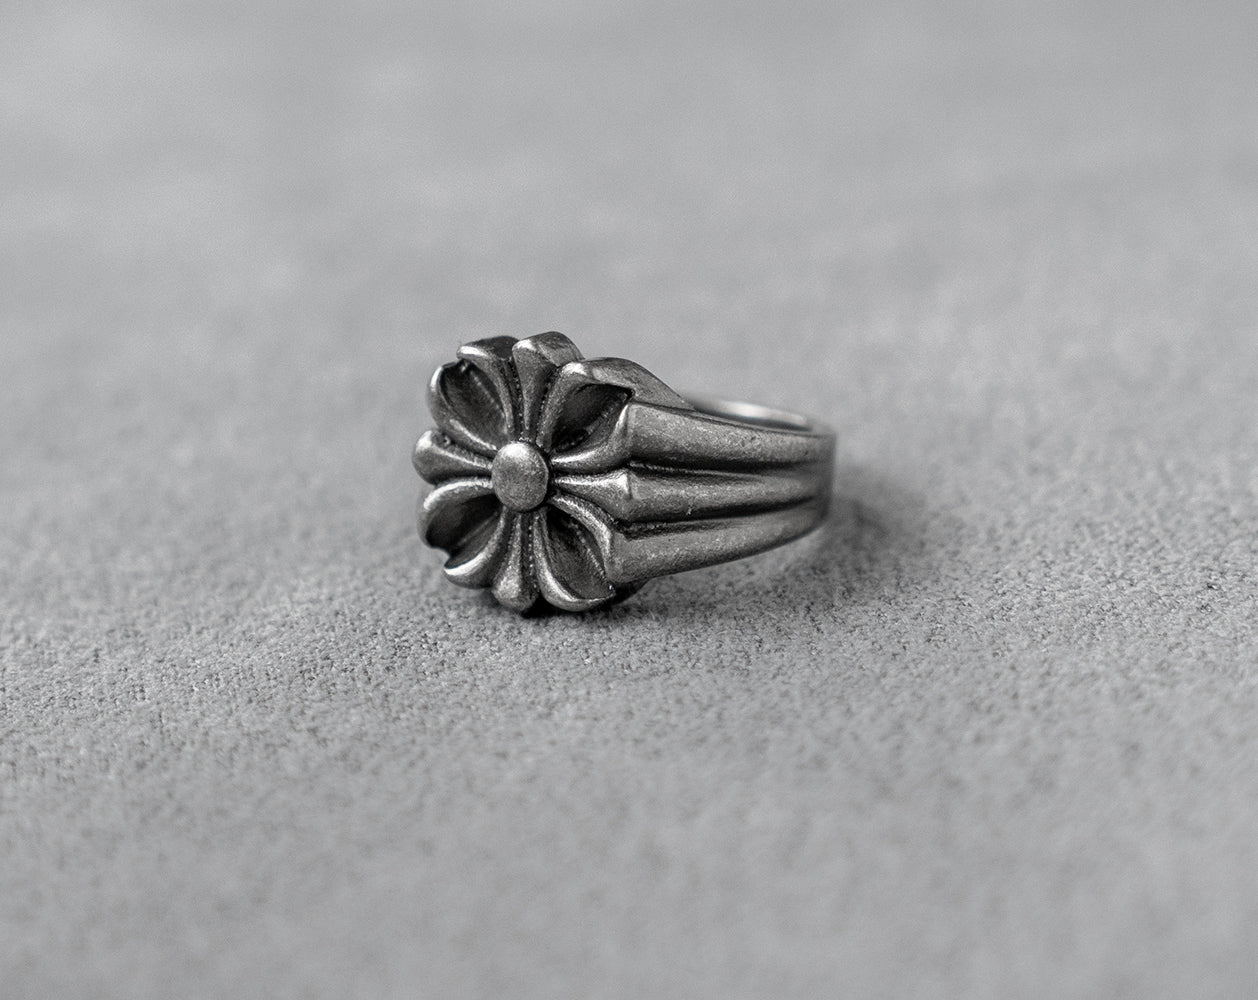 Floral Cross Ring 316 Stainless Steel, Gothic, Punk, Rock Ring